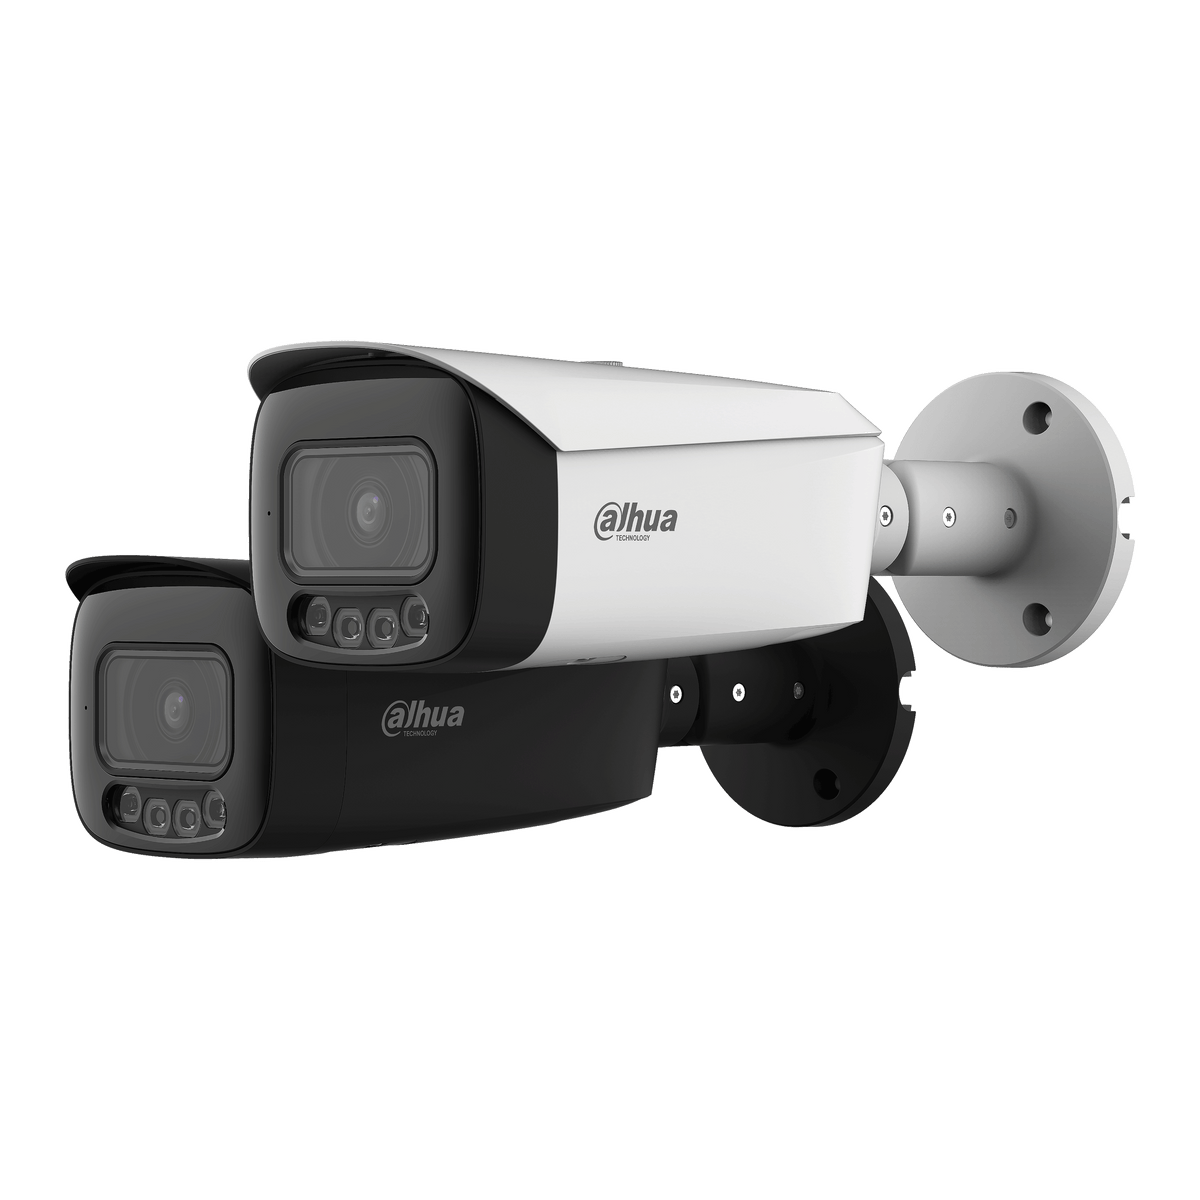 DAHUA IPC-HFW3449T1-AS-PV 4MP Full-color Active Deterrence Fixed-focal Bullet WizSense Network Camera